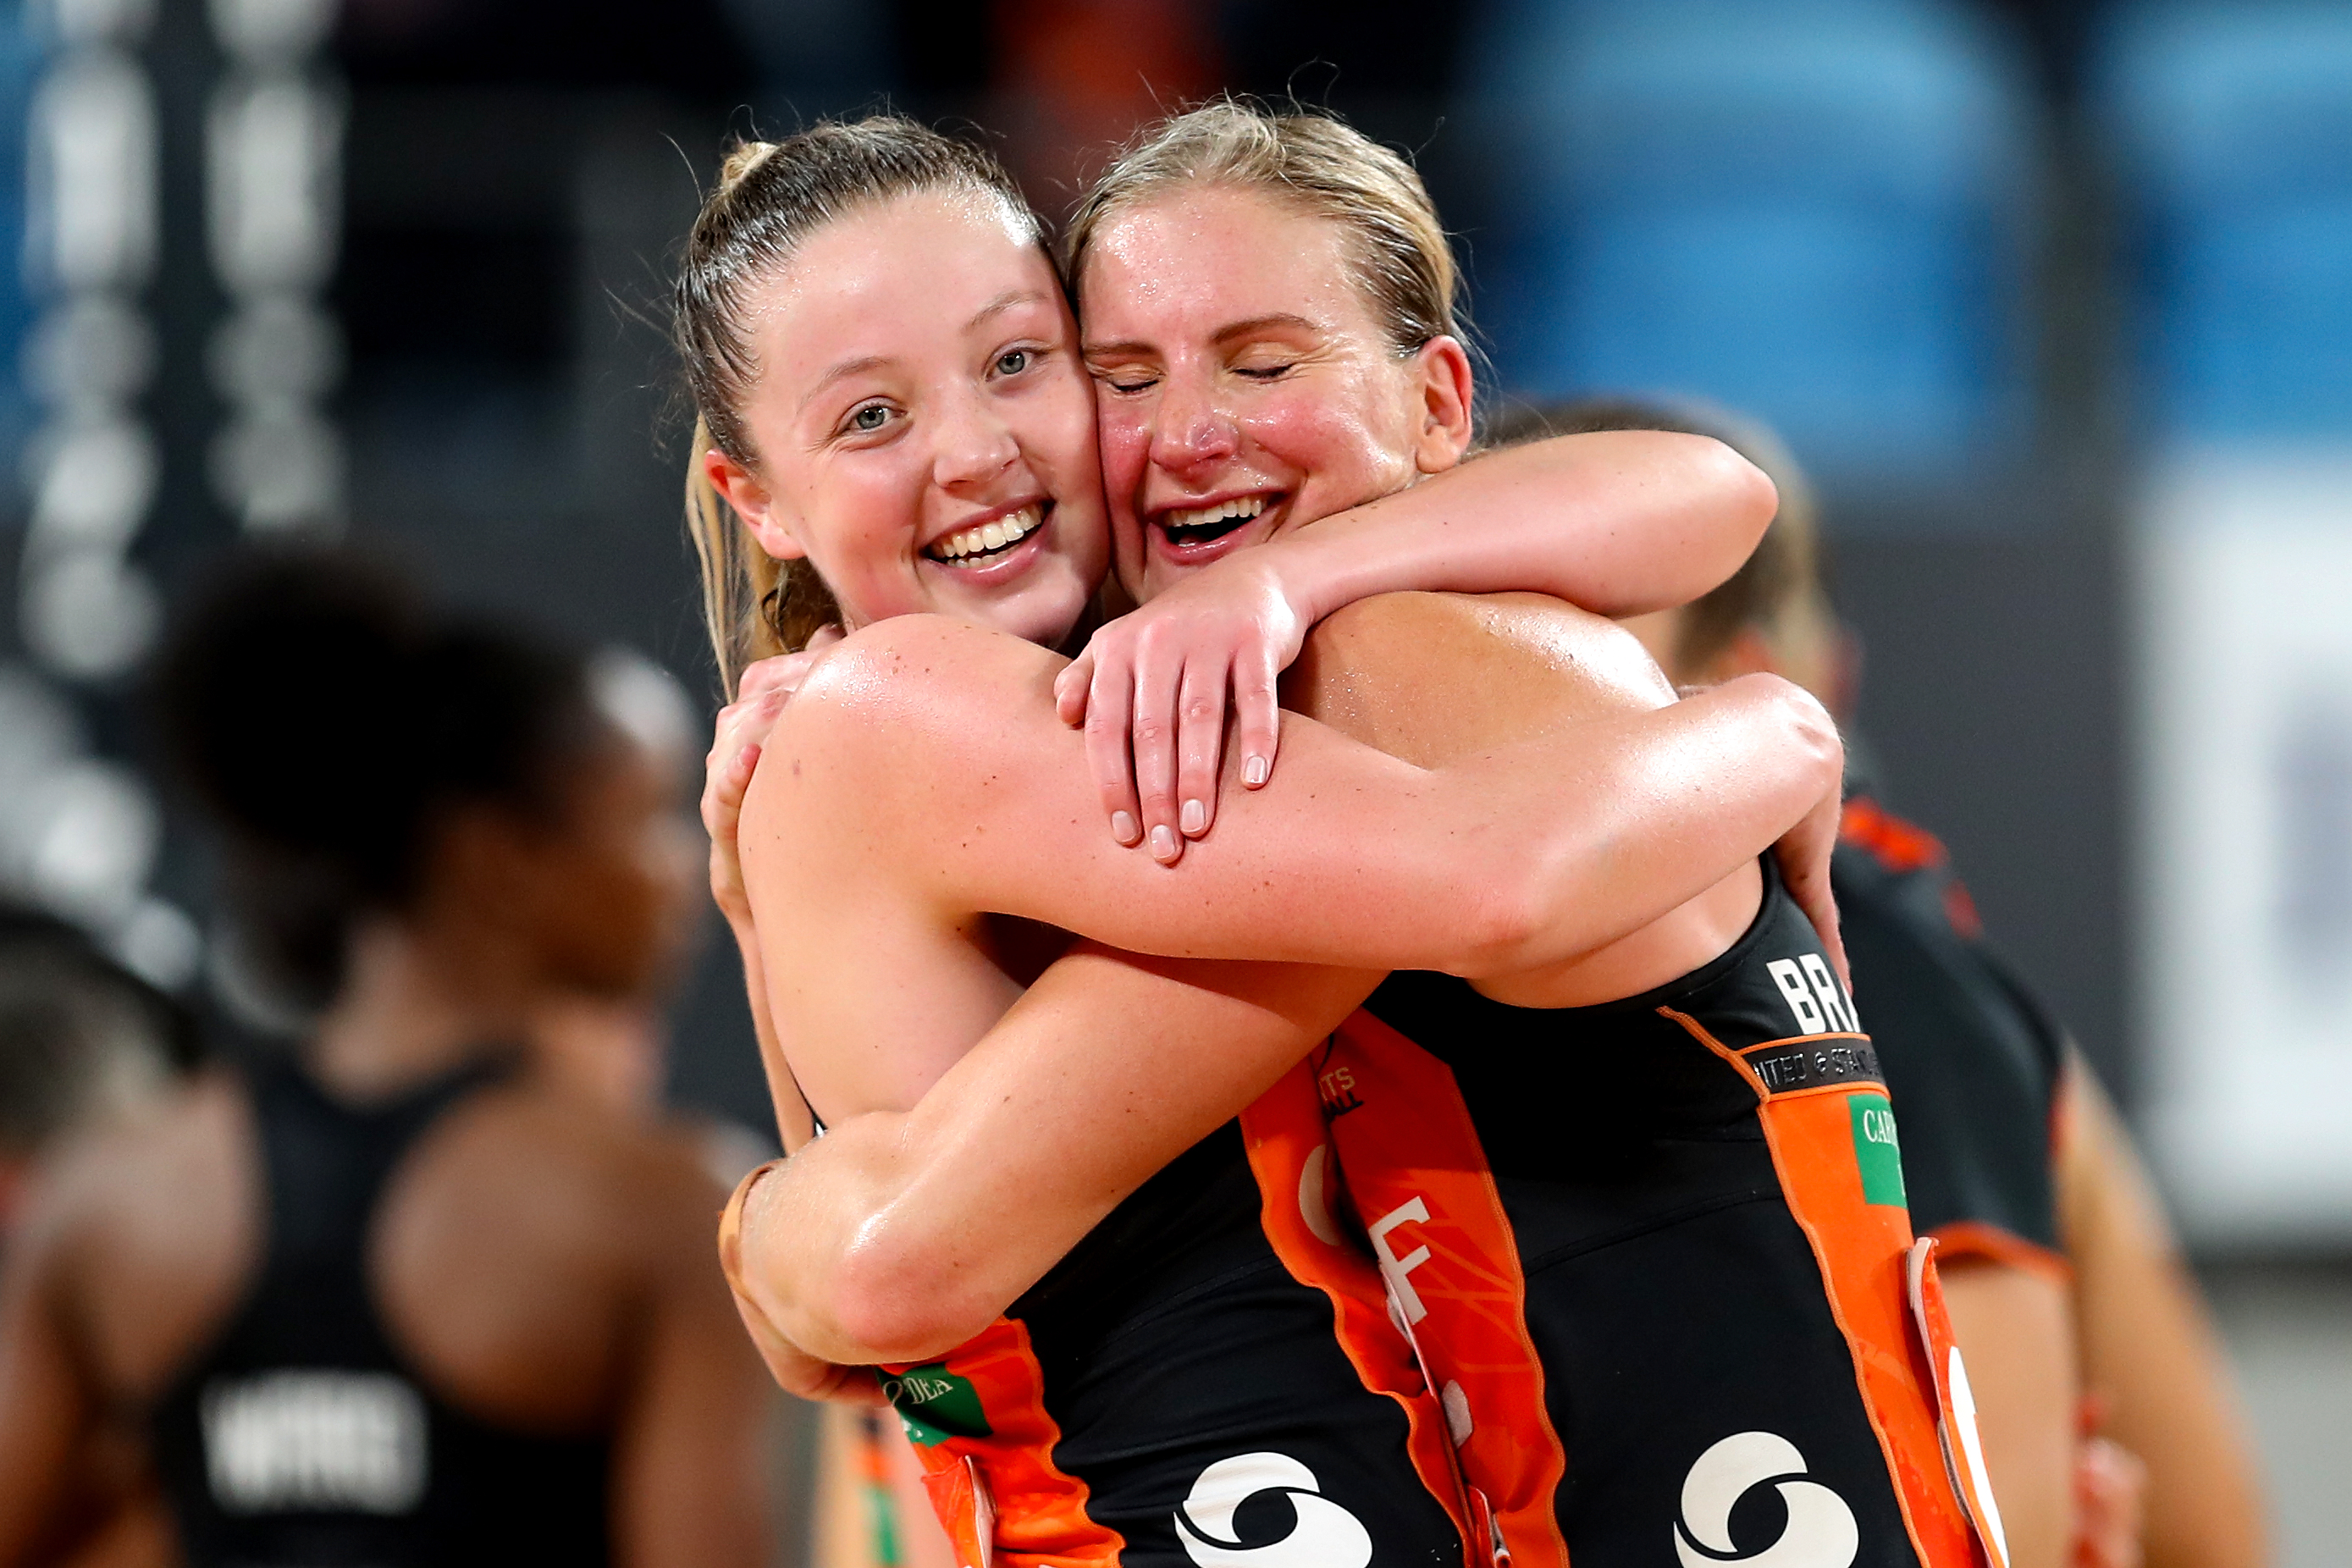 Giants Netballers Sophie Dwyer and April Brandley